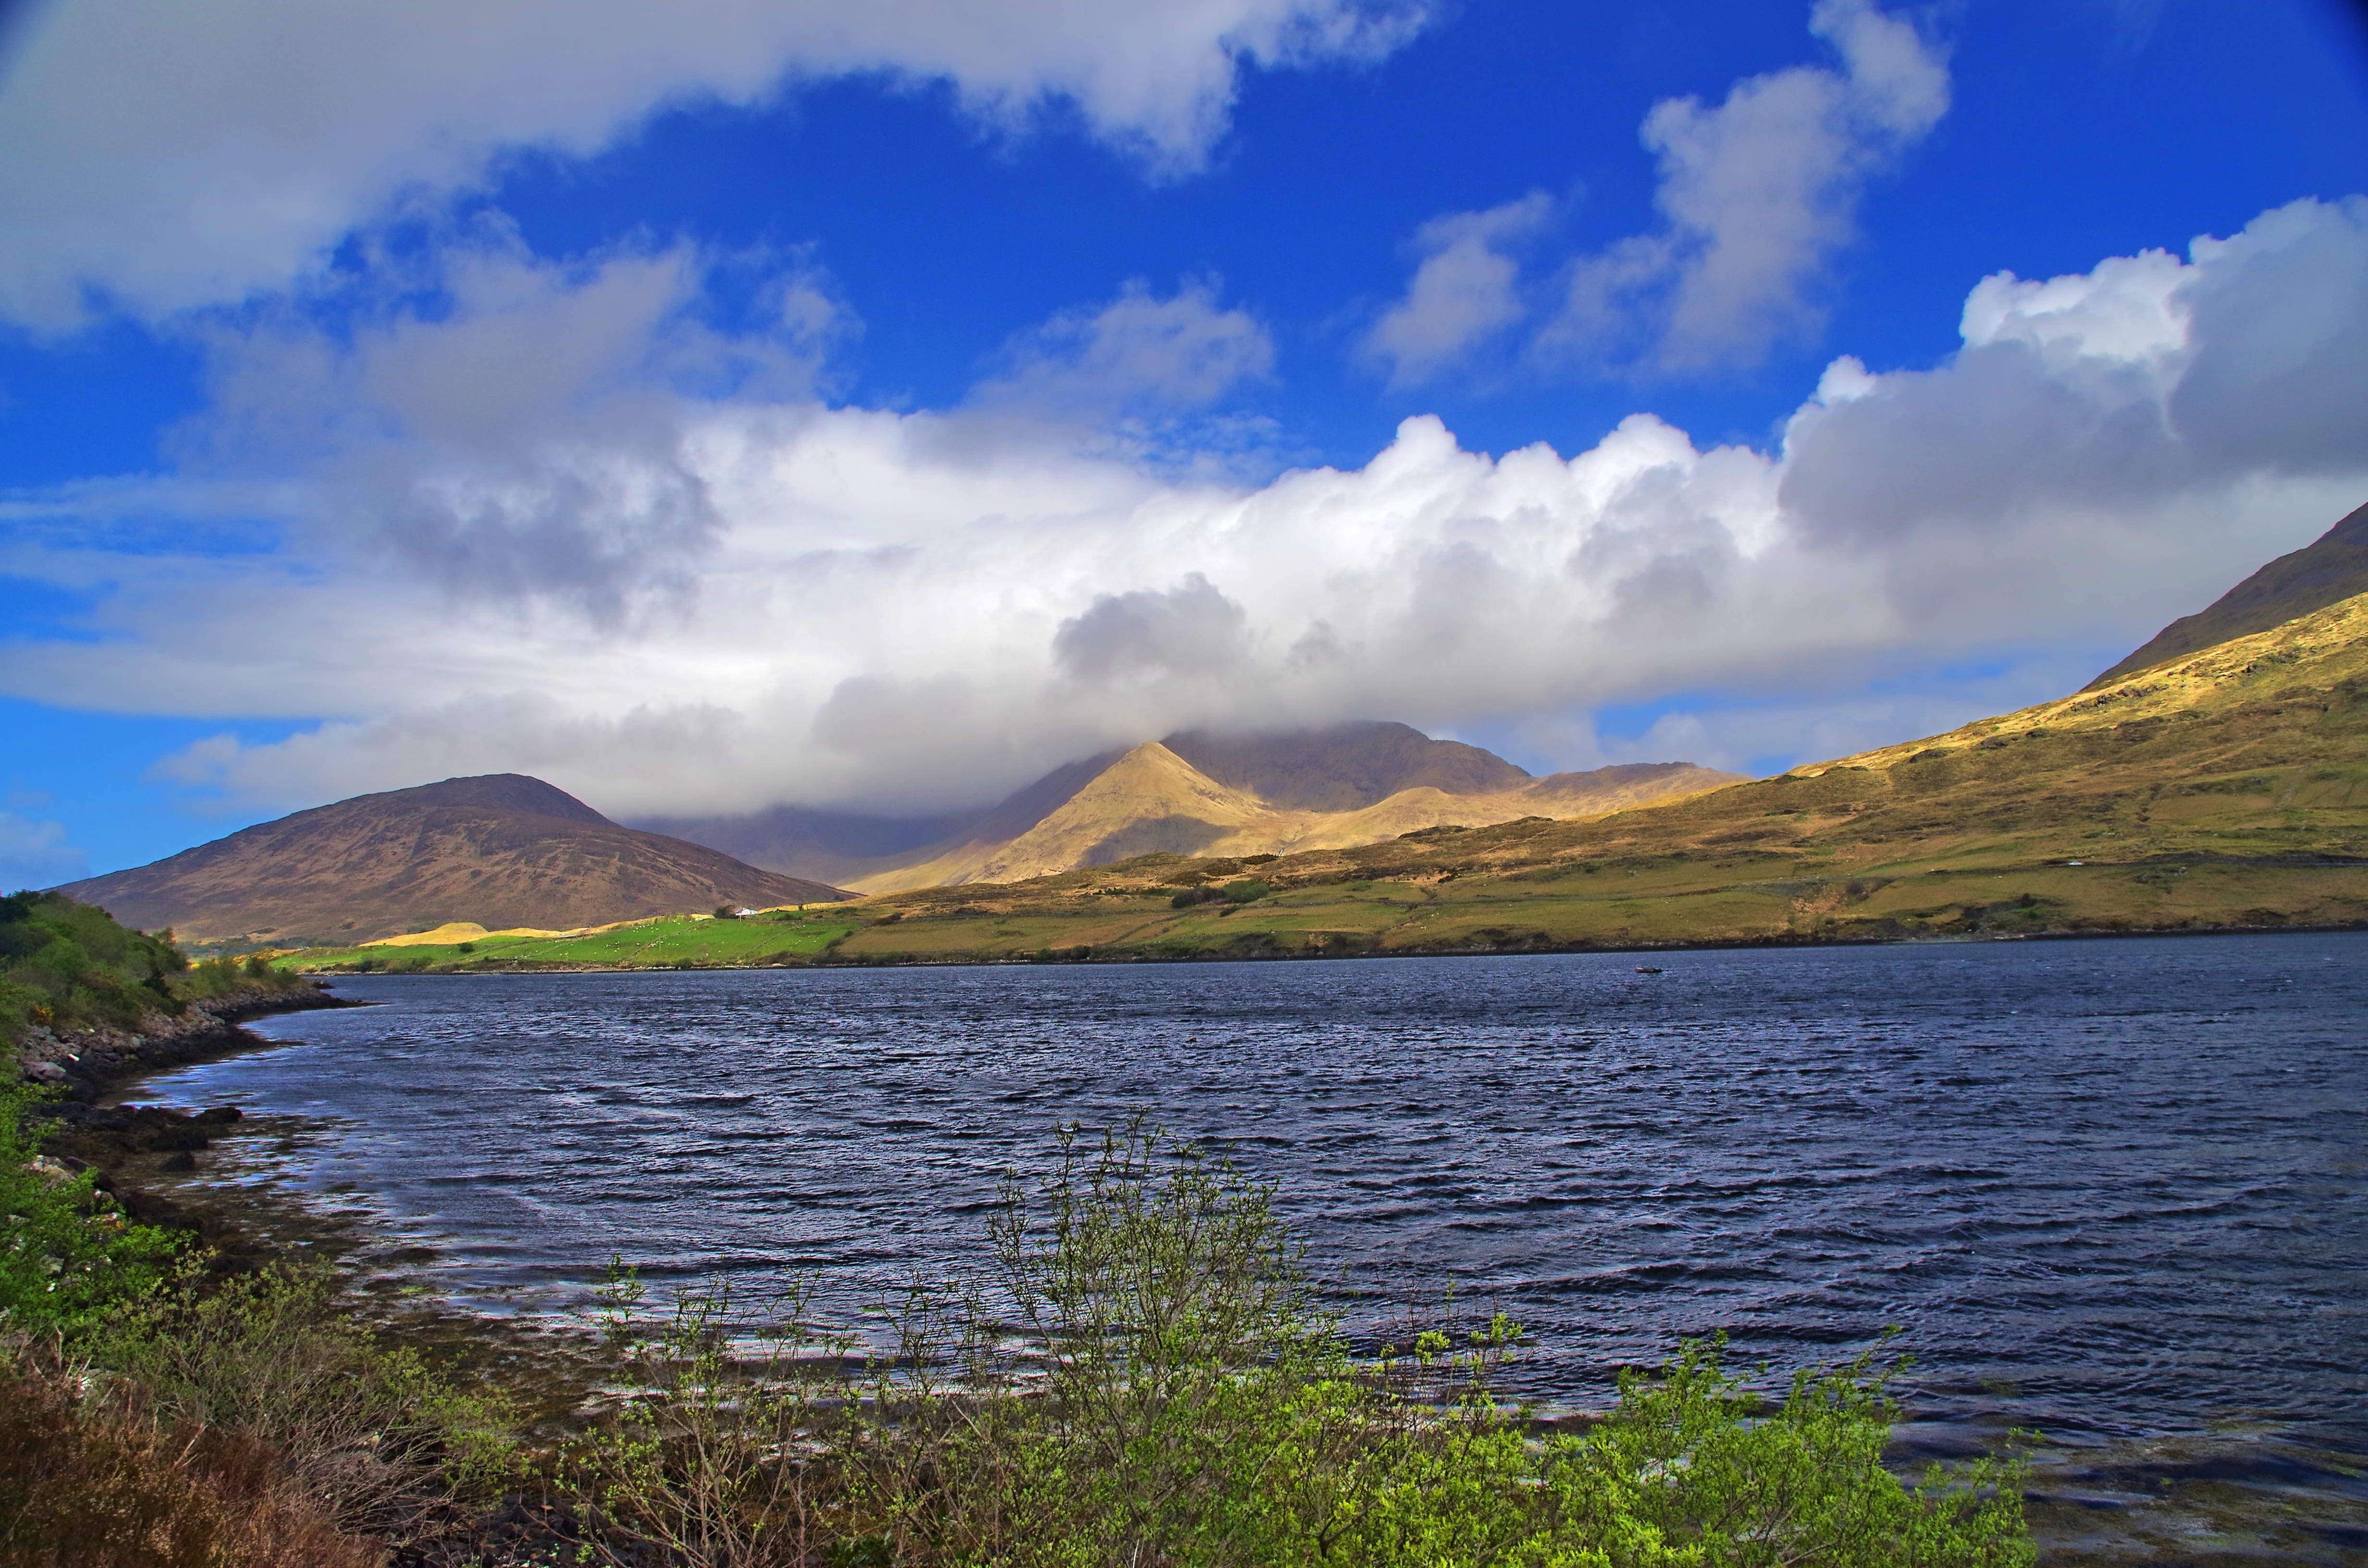 ireland, connemara, galway, mountains, water, sky, clouds, holiday